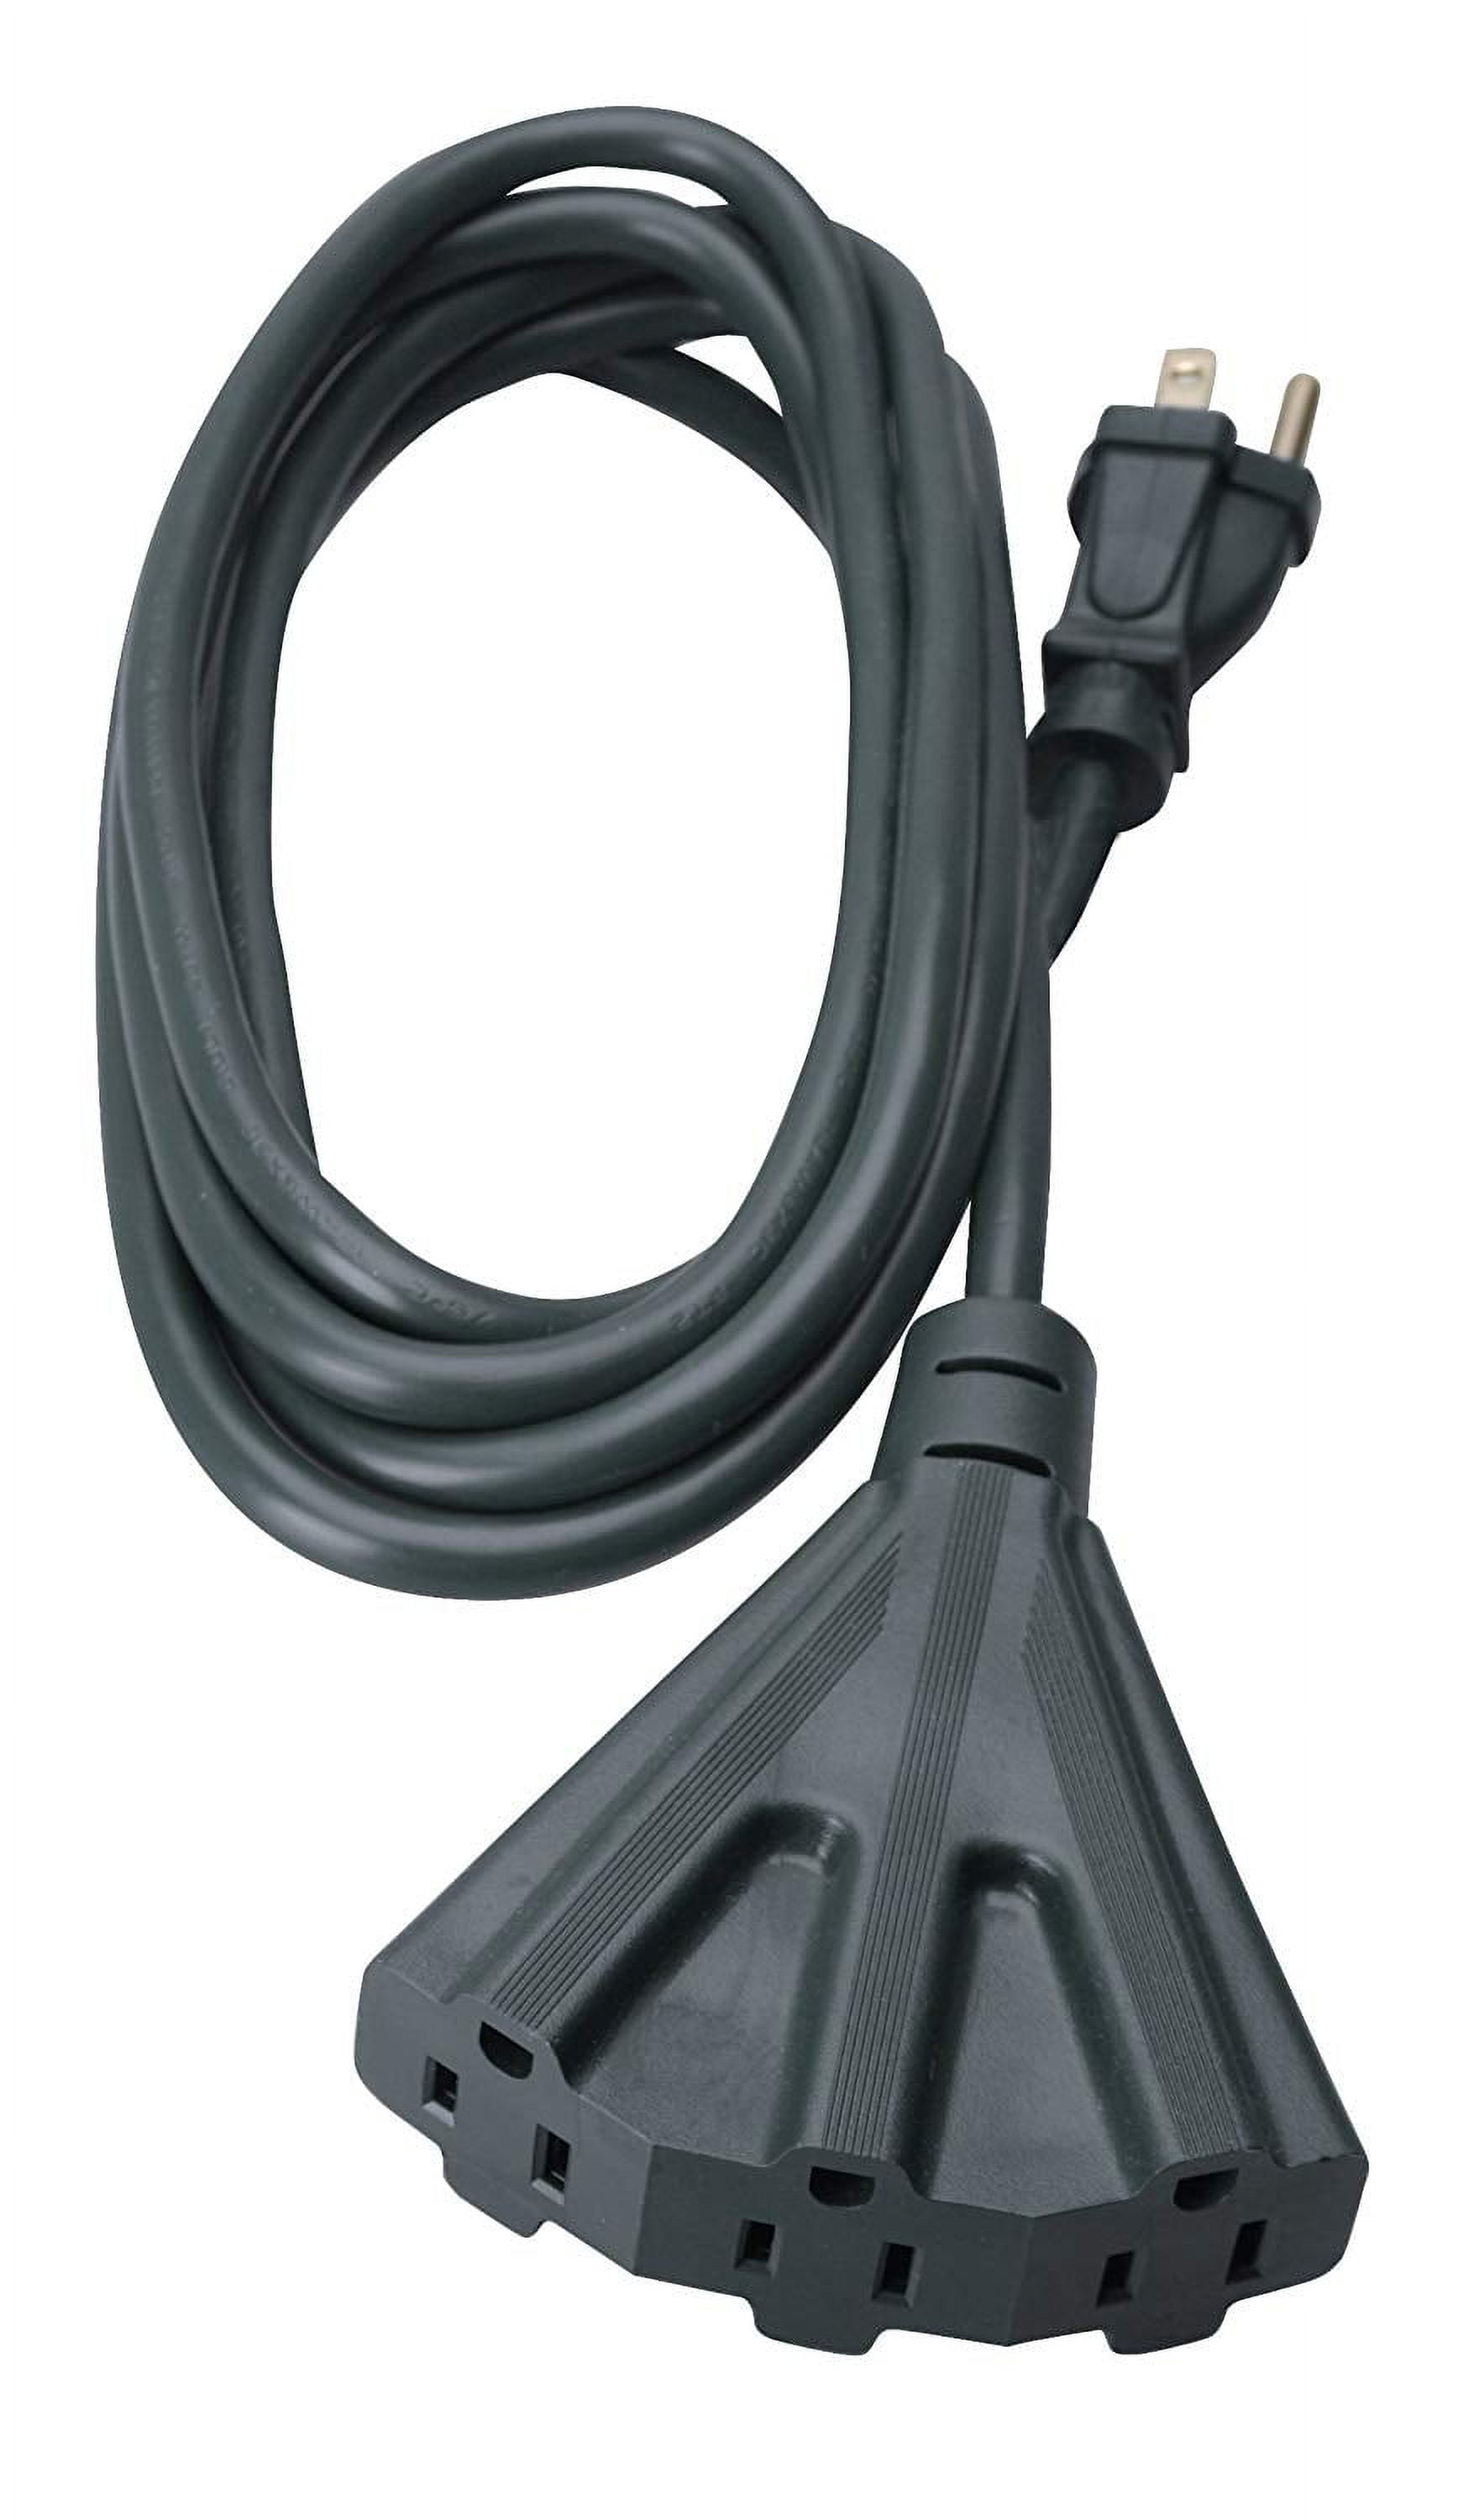 Woods 2451 14/3 Sjtow Agricultural Extension Cord with 3-Outlet Power Block, Black